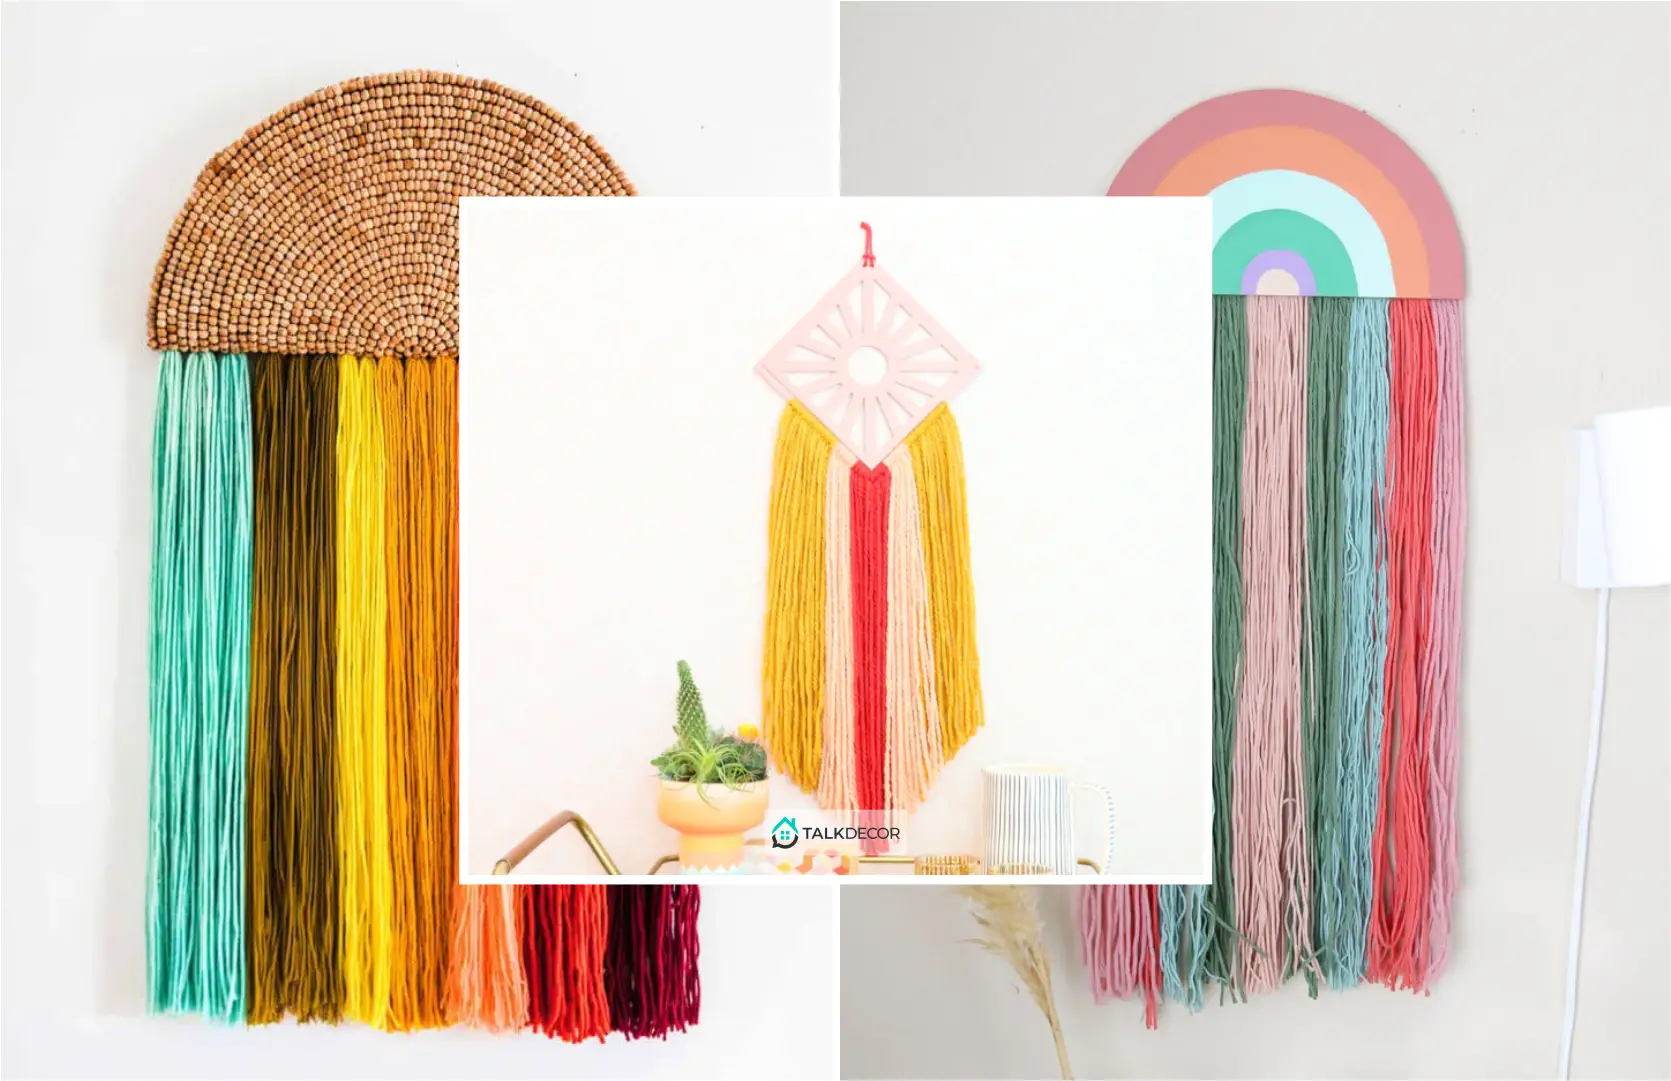 Beautify Your Home with These 55 Yarn Wall Hanging Ideas